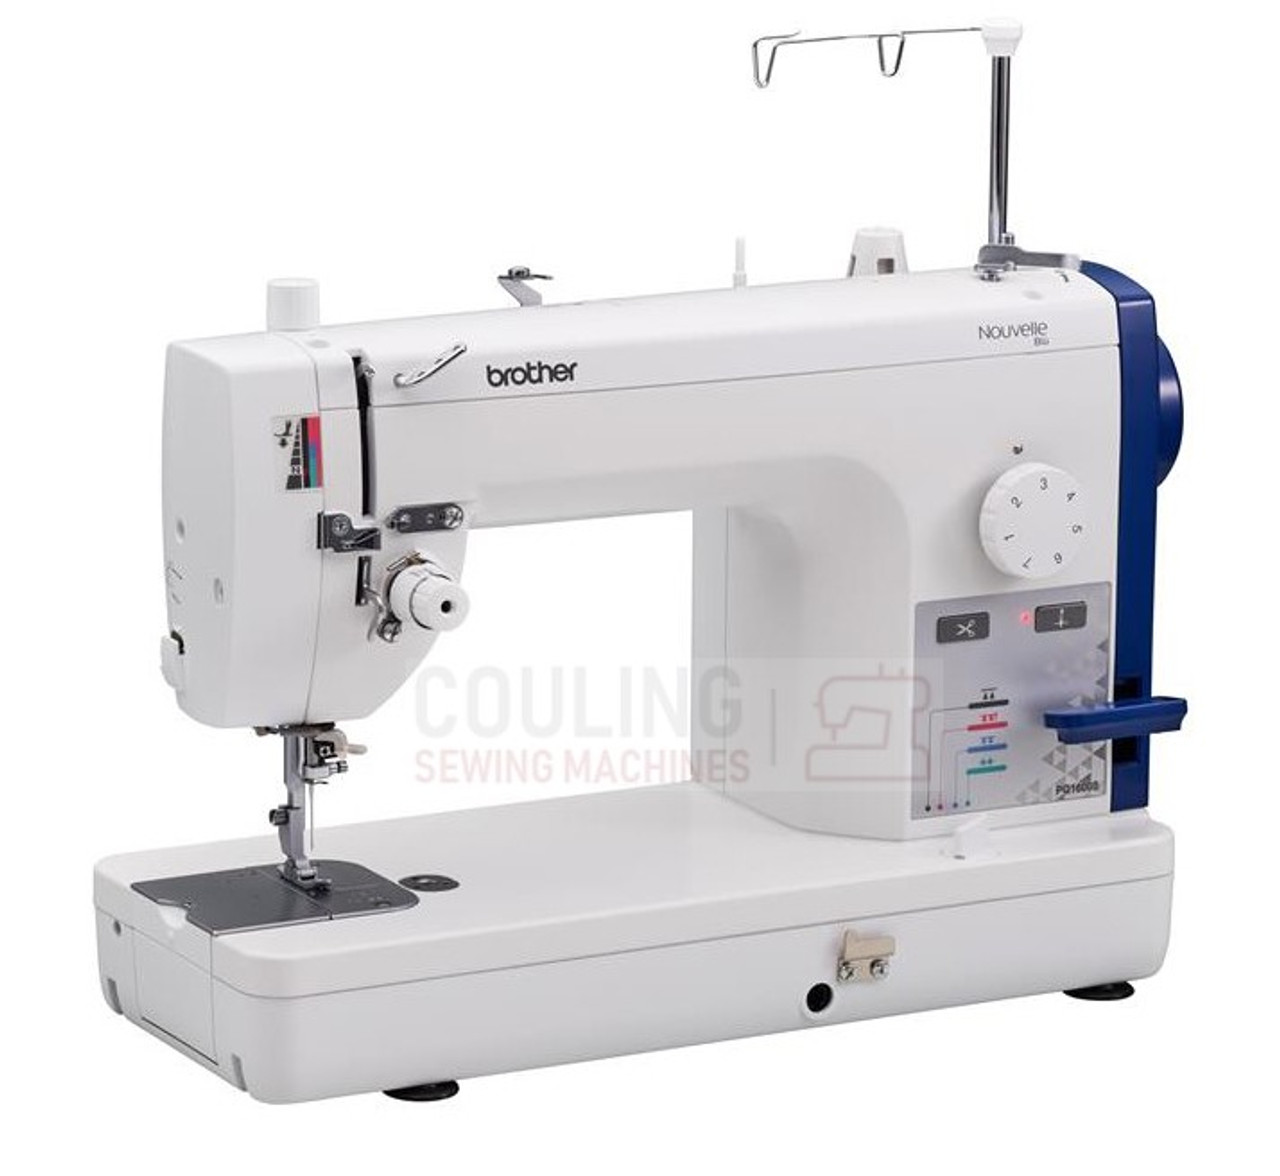 Brother SH40 Sewing Machine - NEW MODEL - Couling Sewing Machines